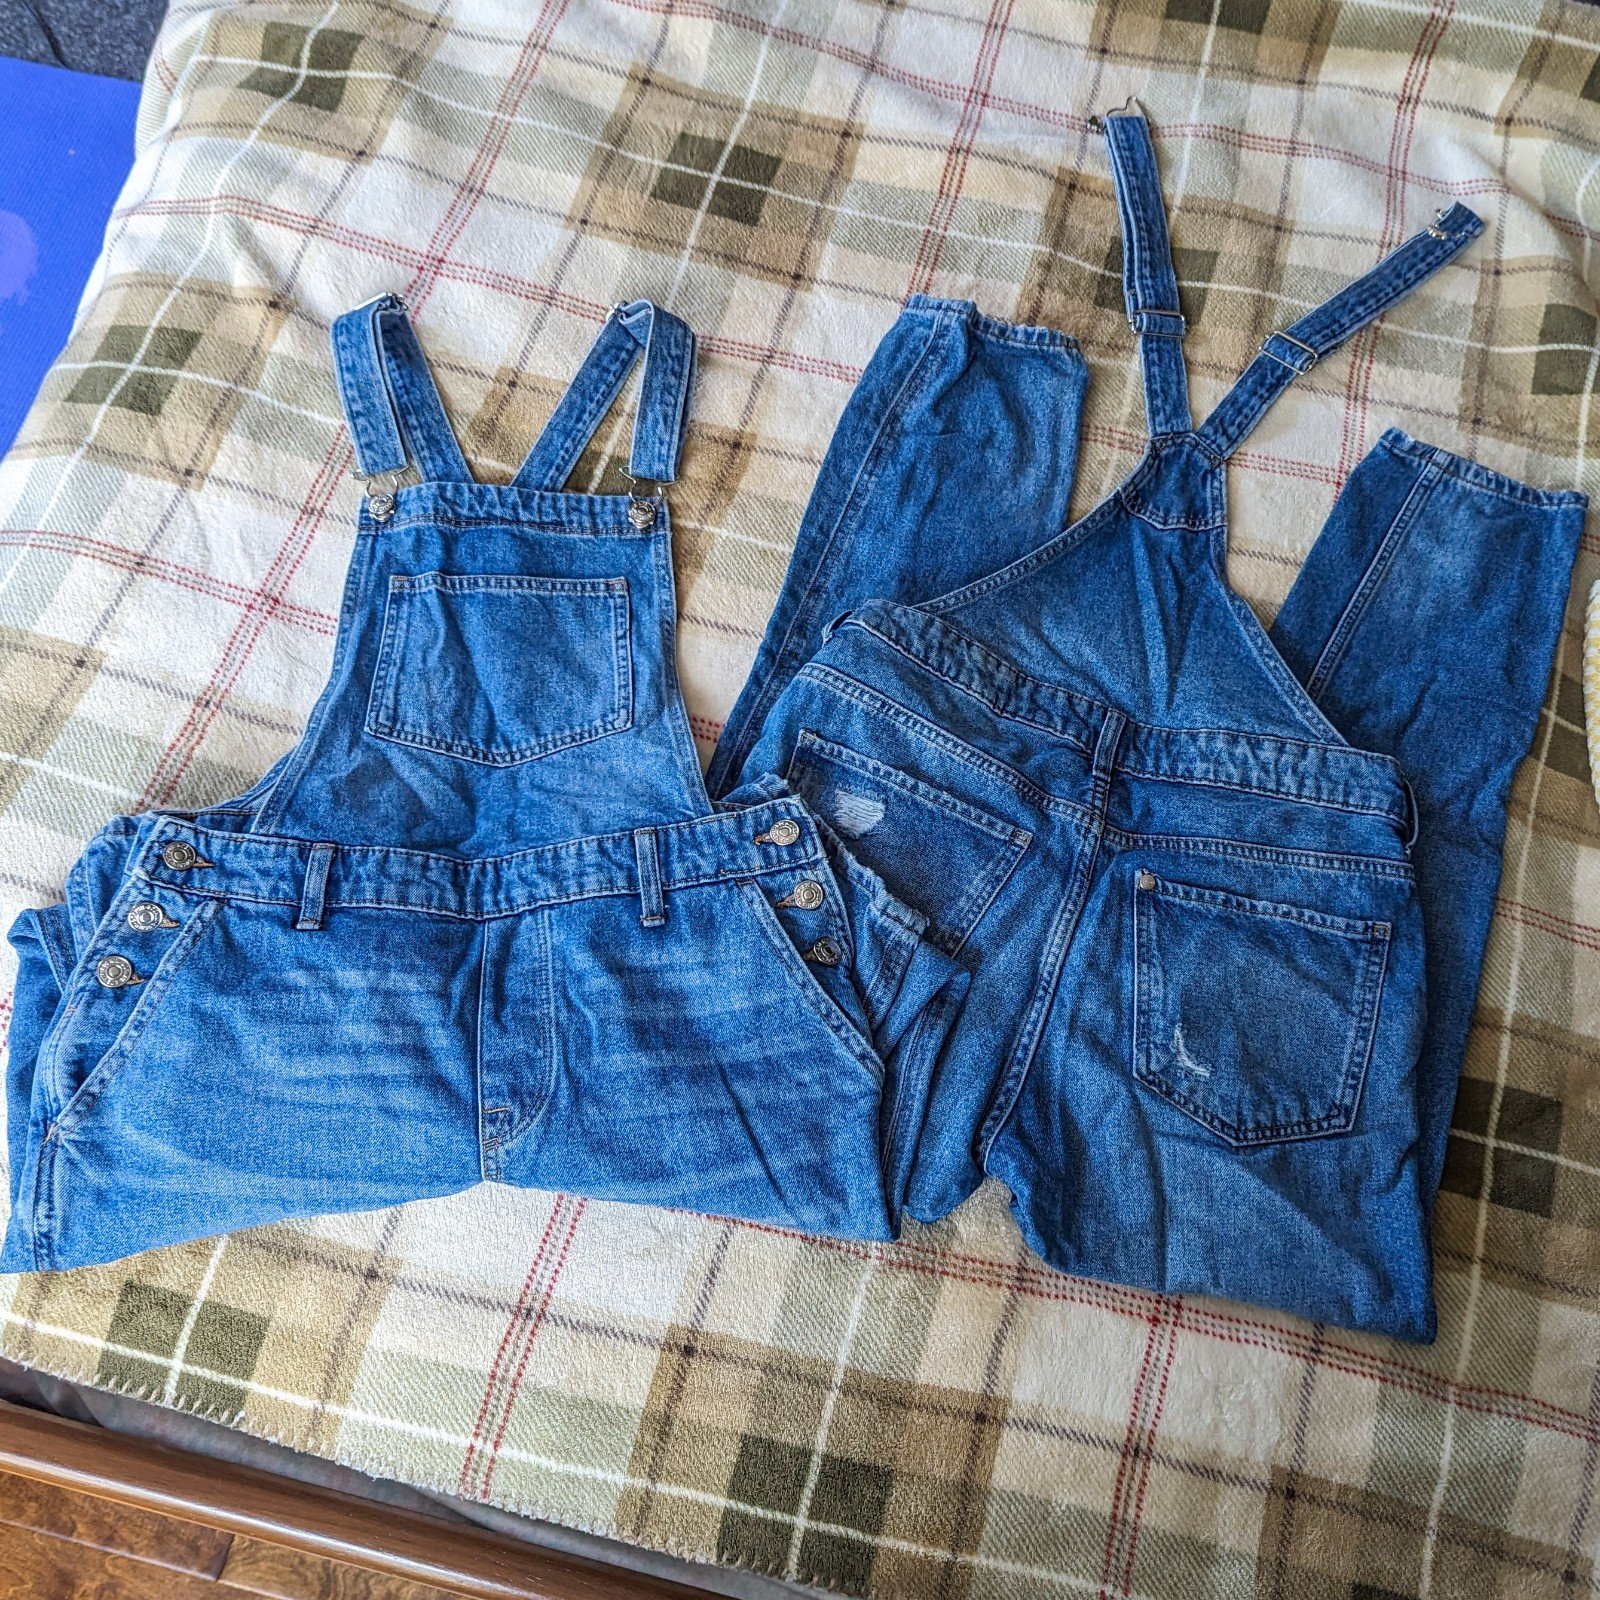 Personality 2 Pair H&M Denim Overalls, Size 2, Like New